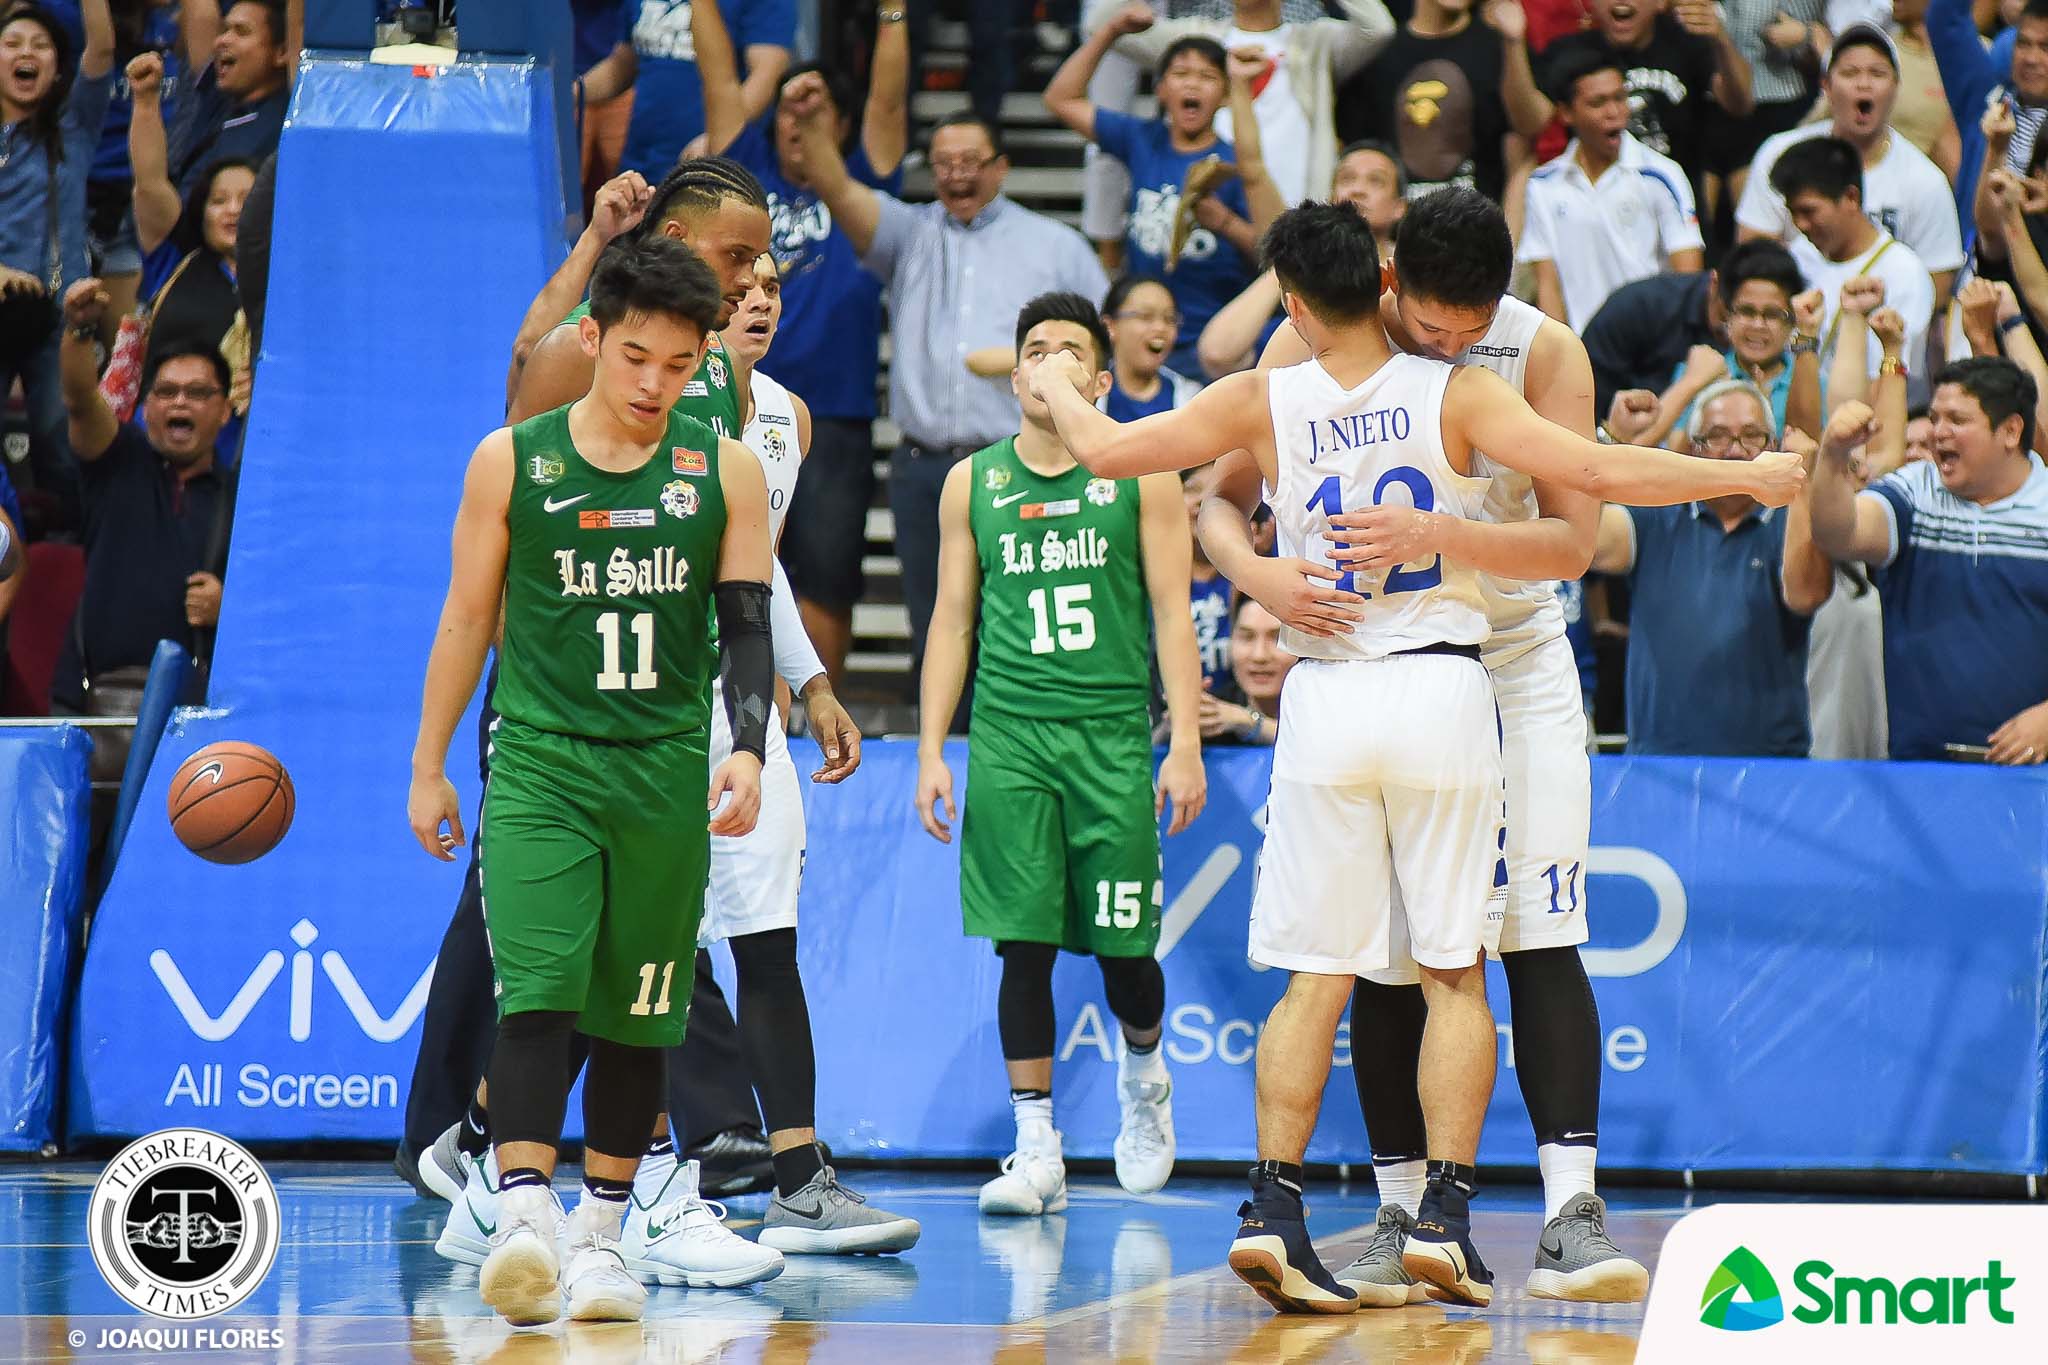 UAAP-80-Finals-G1-DLSU-vs.-ADMU-Go-9908 Isaac Go does not want to be called clutch: 'It's better to say that the team is clutch' ADMU Basketball News UAAP  - philippine sports news